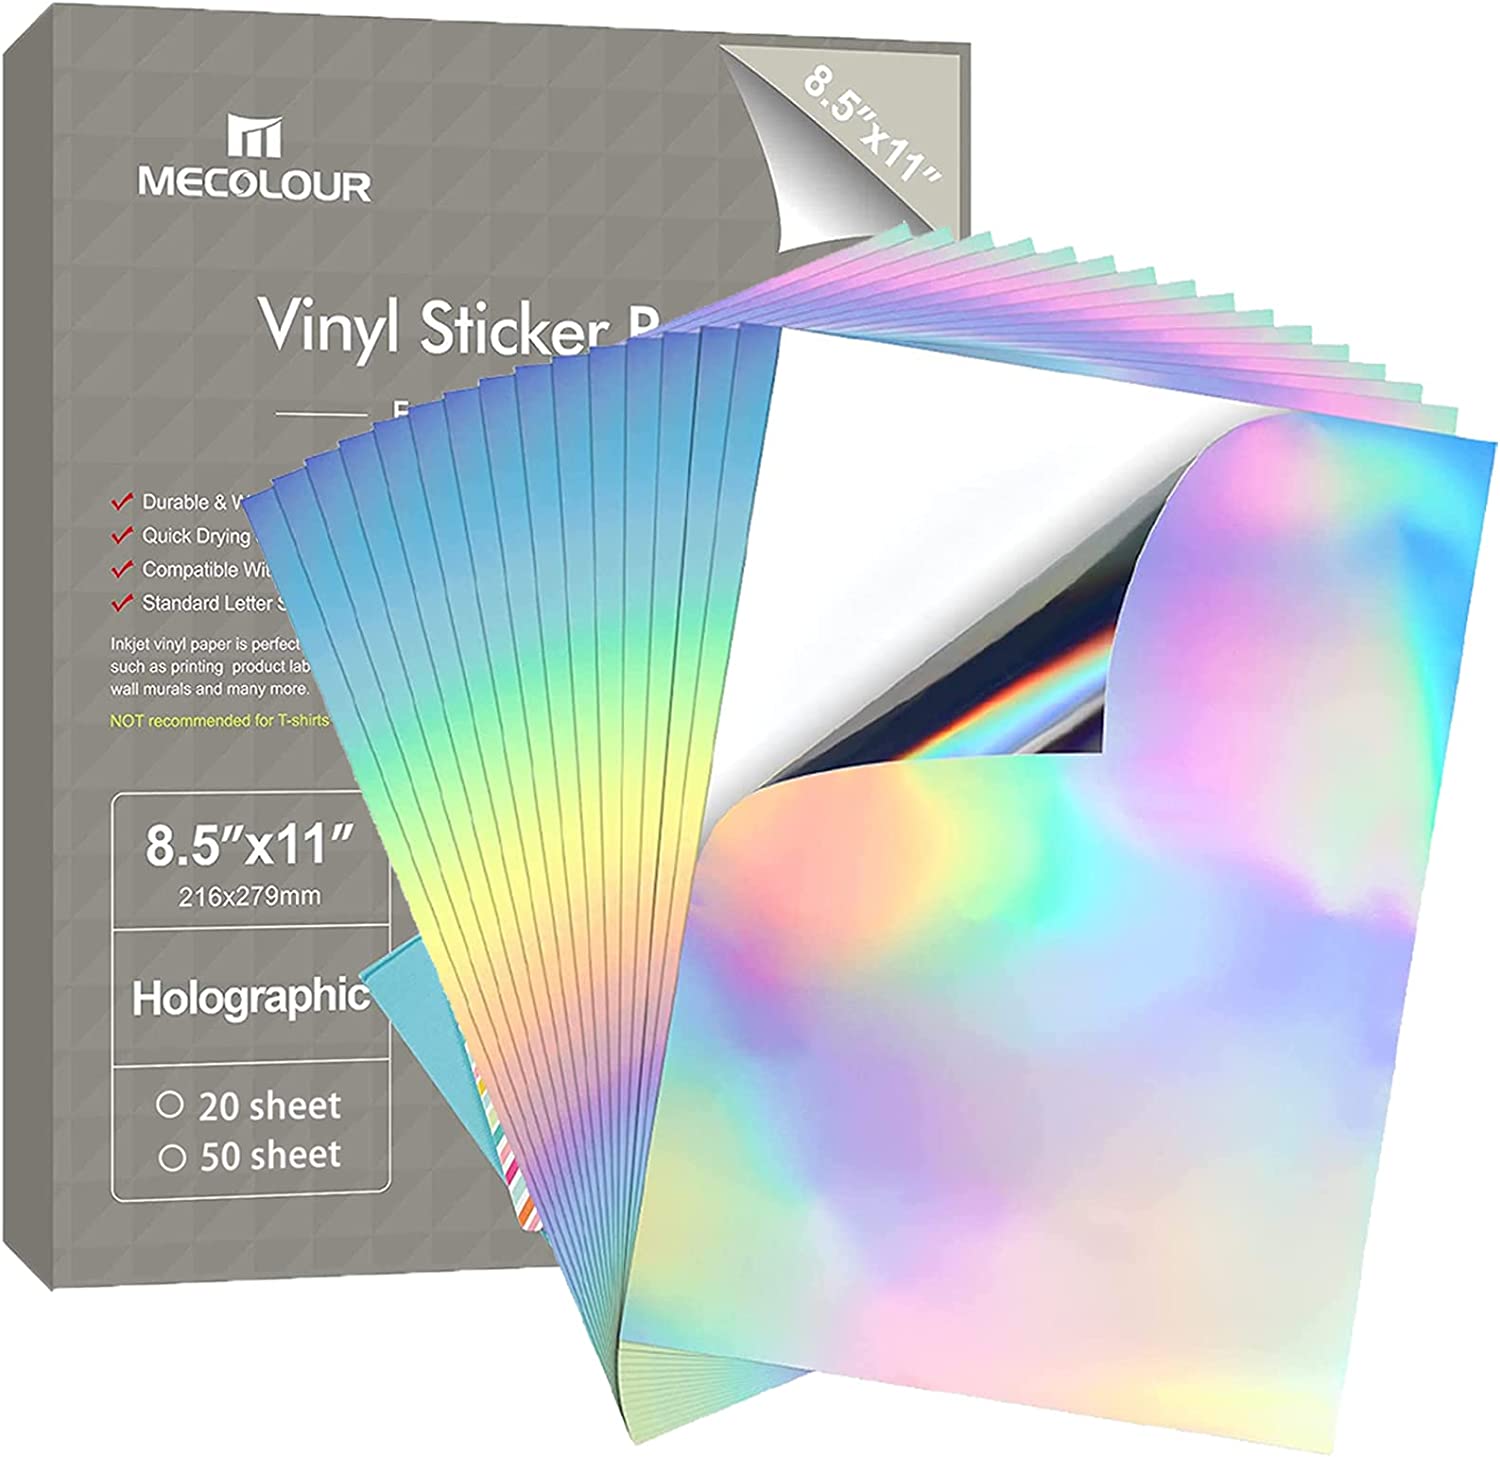 Koala Holographic Sticker Paper Clear RAINBOW Holographic Overlay Vinyl  Sticker Paper, Transparent Self-Adhesive Laminting Sheets A4 